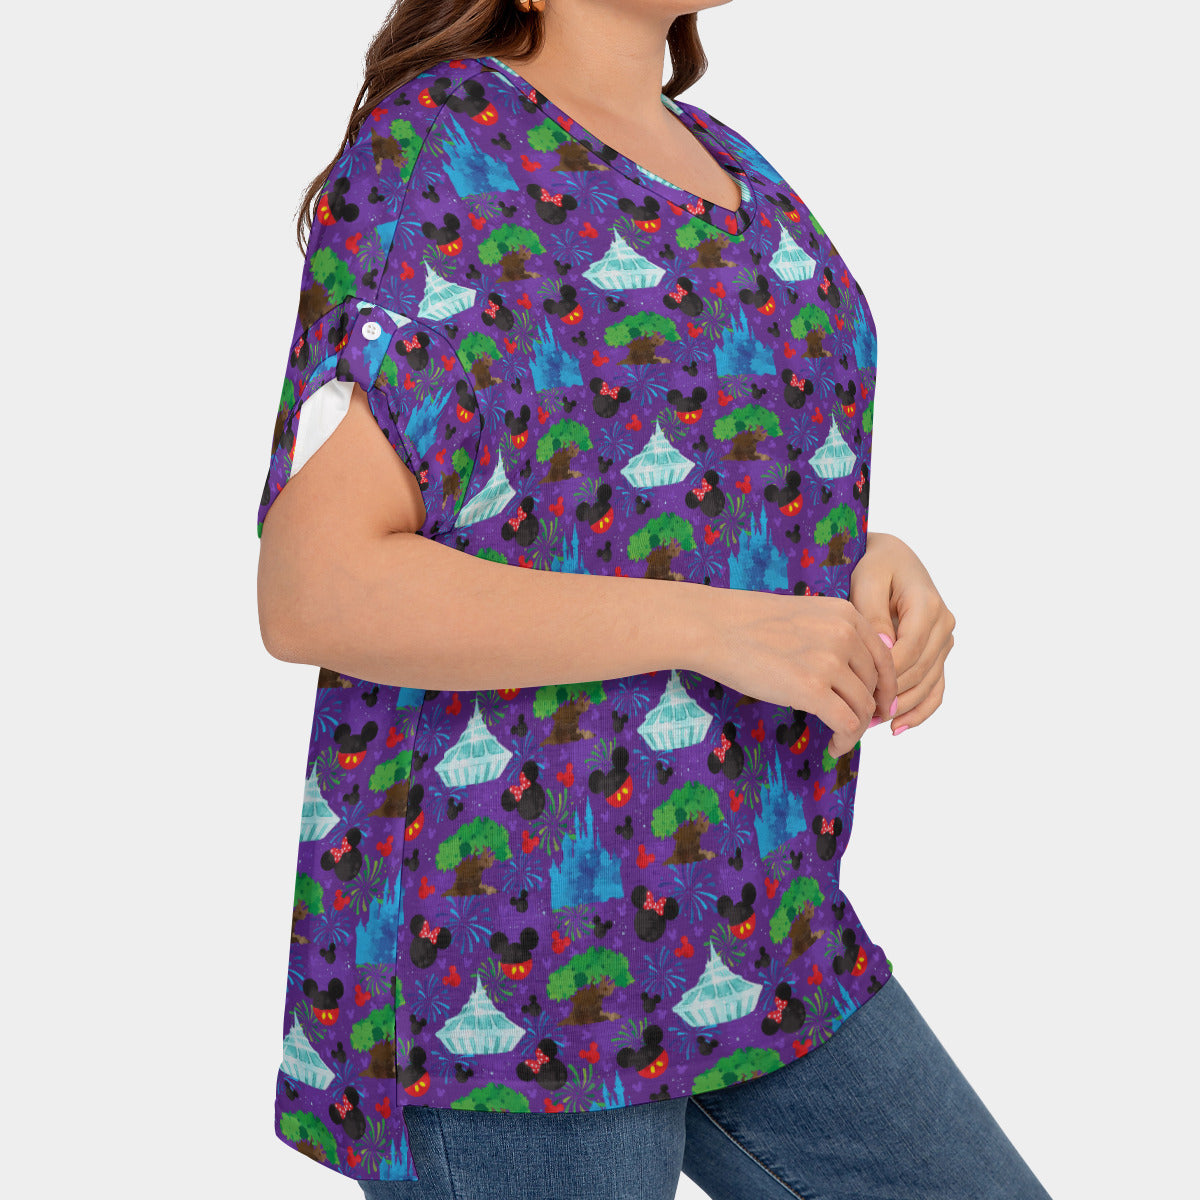 Park Hopper Fireworks Women's Plus Size Short Sleeve T-shirt With Sleeve Loops